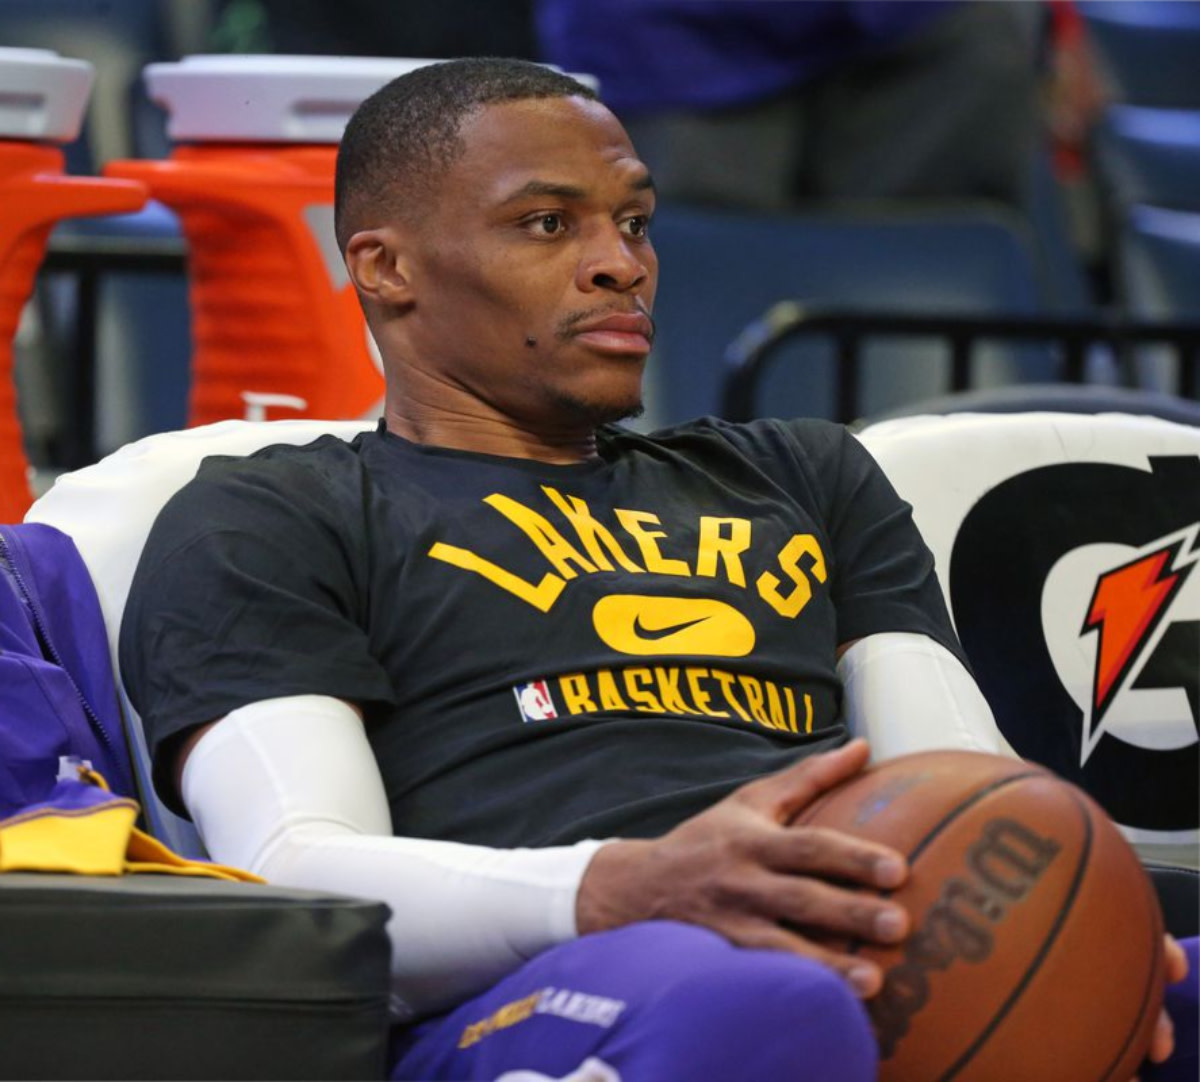 Russell Westbrook Sends Message To Frank Vogel For Benching Him During Crunch Time: "I'm Not Accustomed To Sitting For Long Stretches."